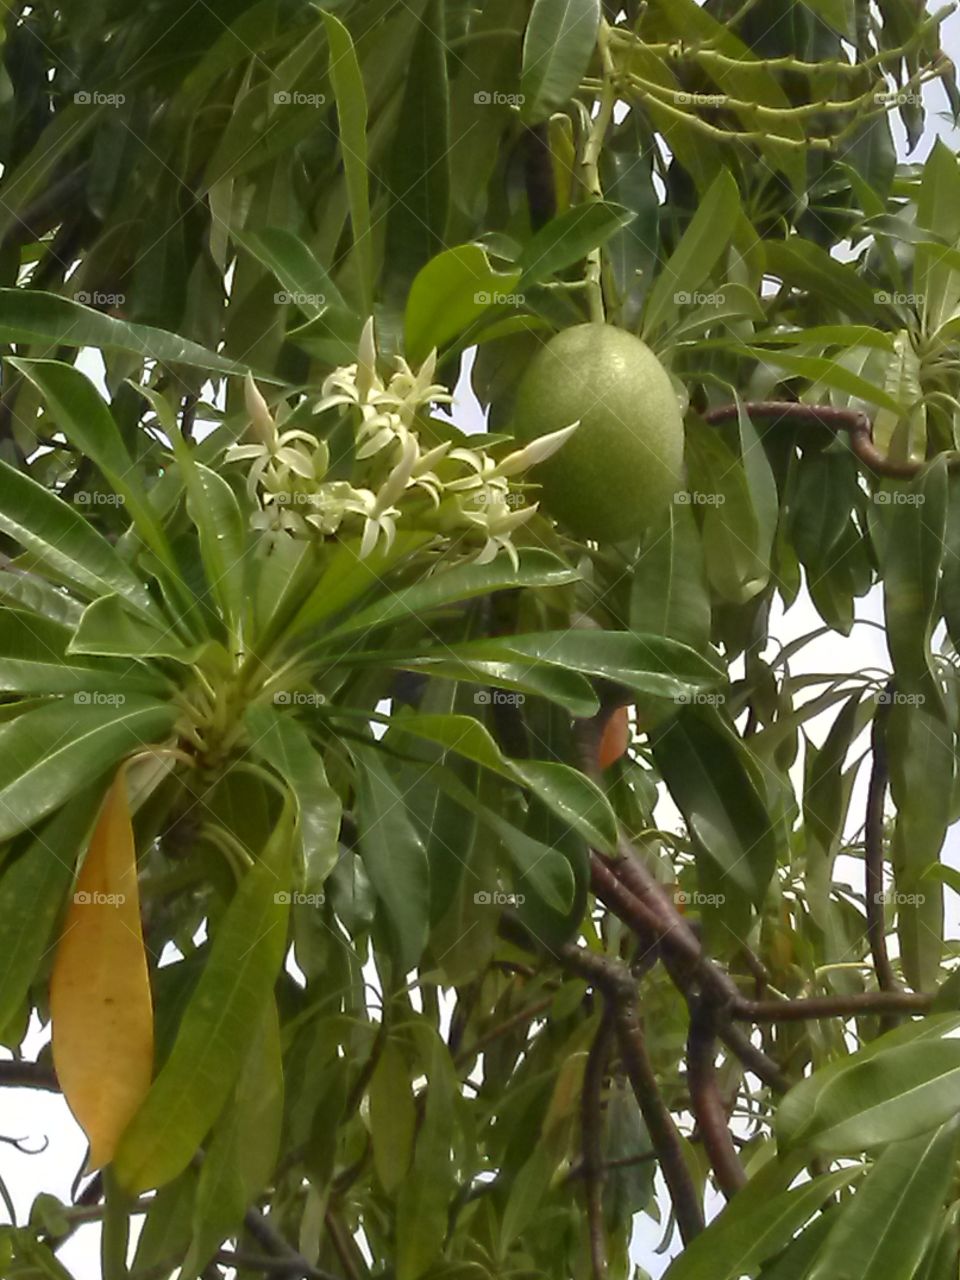 A one fruit